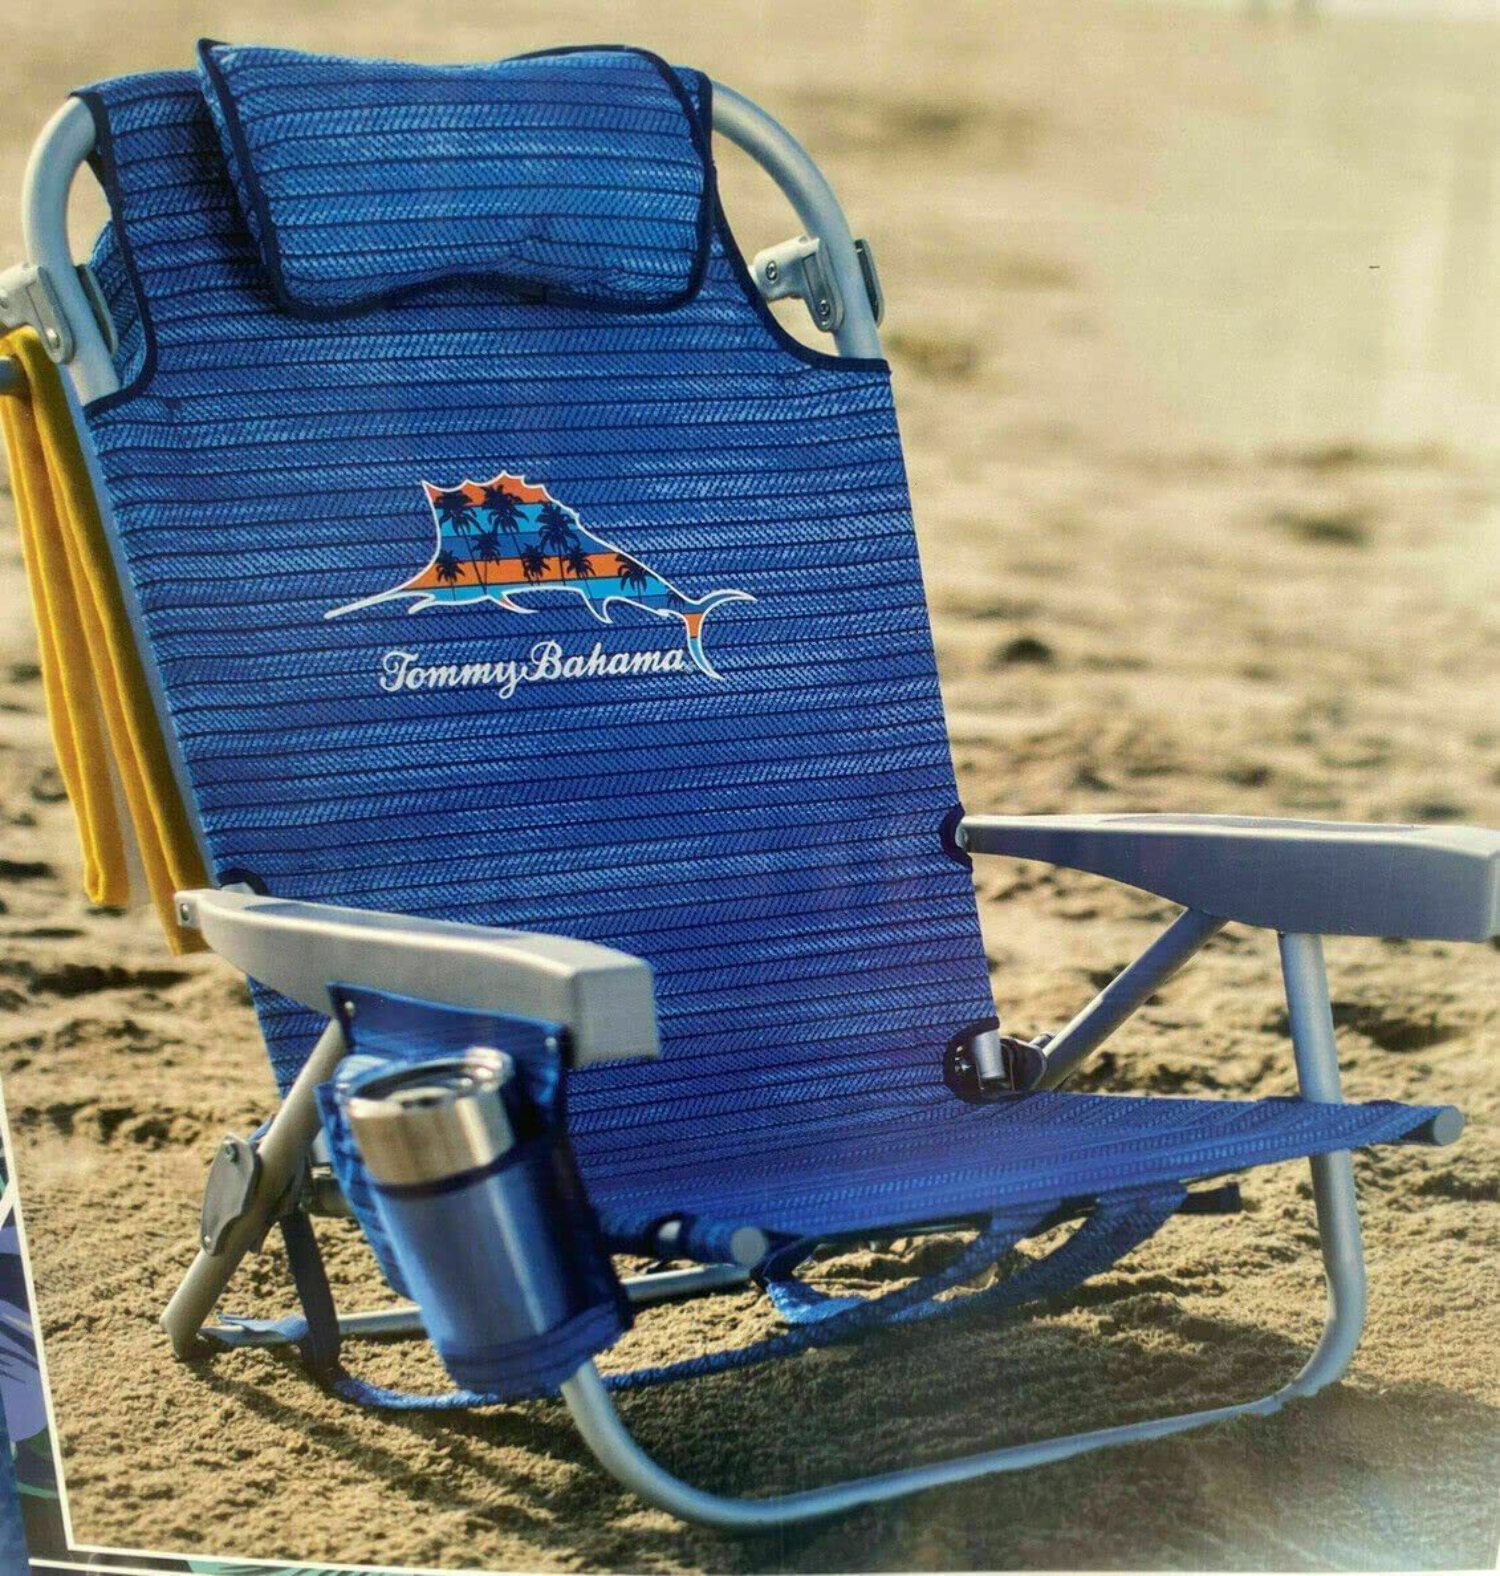 Tommy Bahama Backpack Beach Chair - image 1 of 10